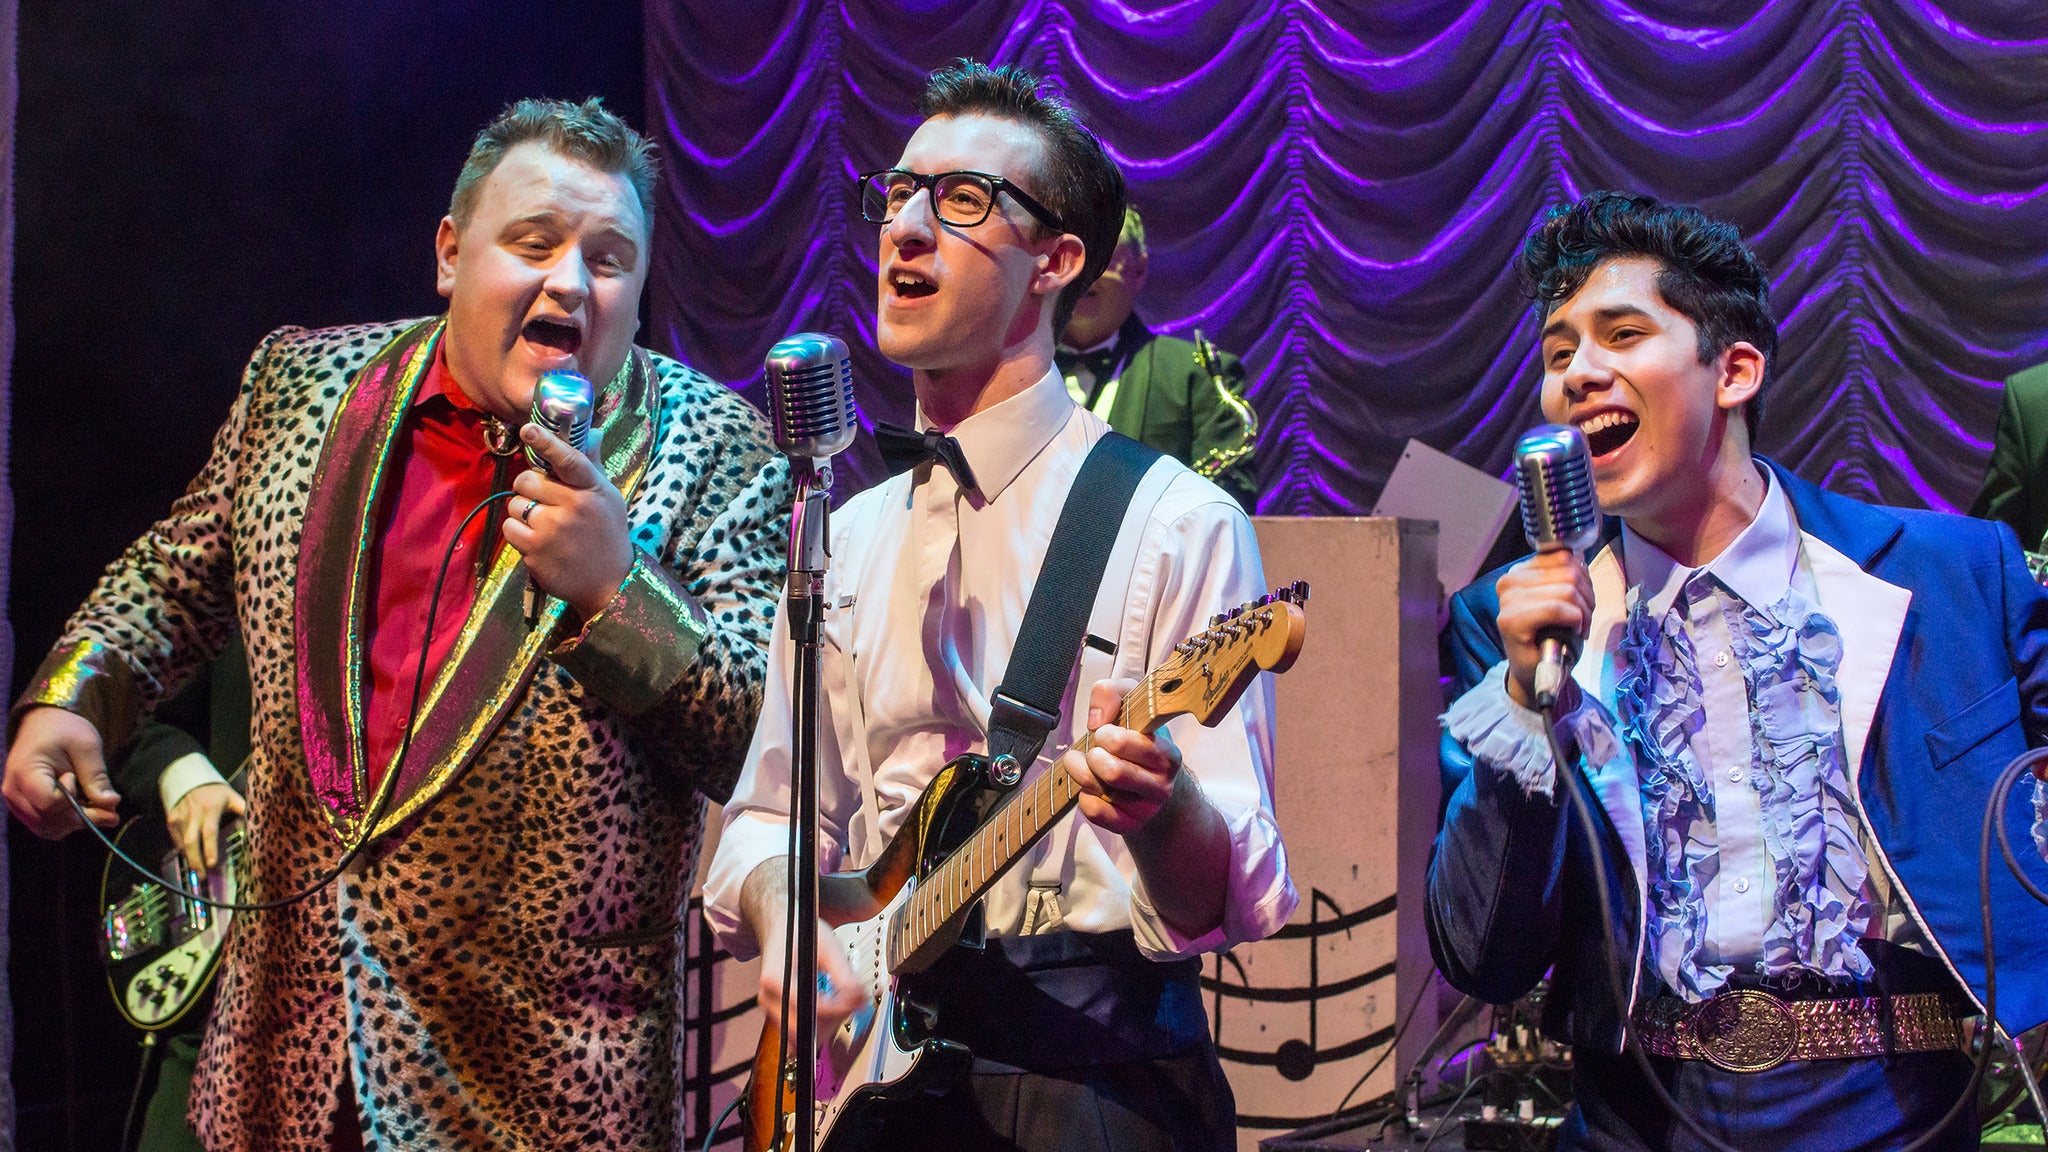 Buddy - the Buddy Holly Story (Touring) presale password for early tickets in San Antonio